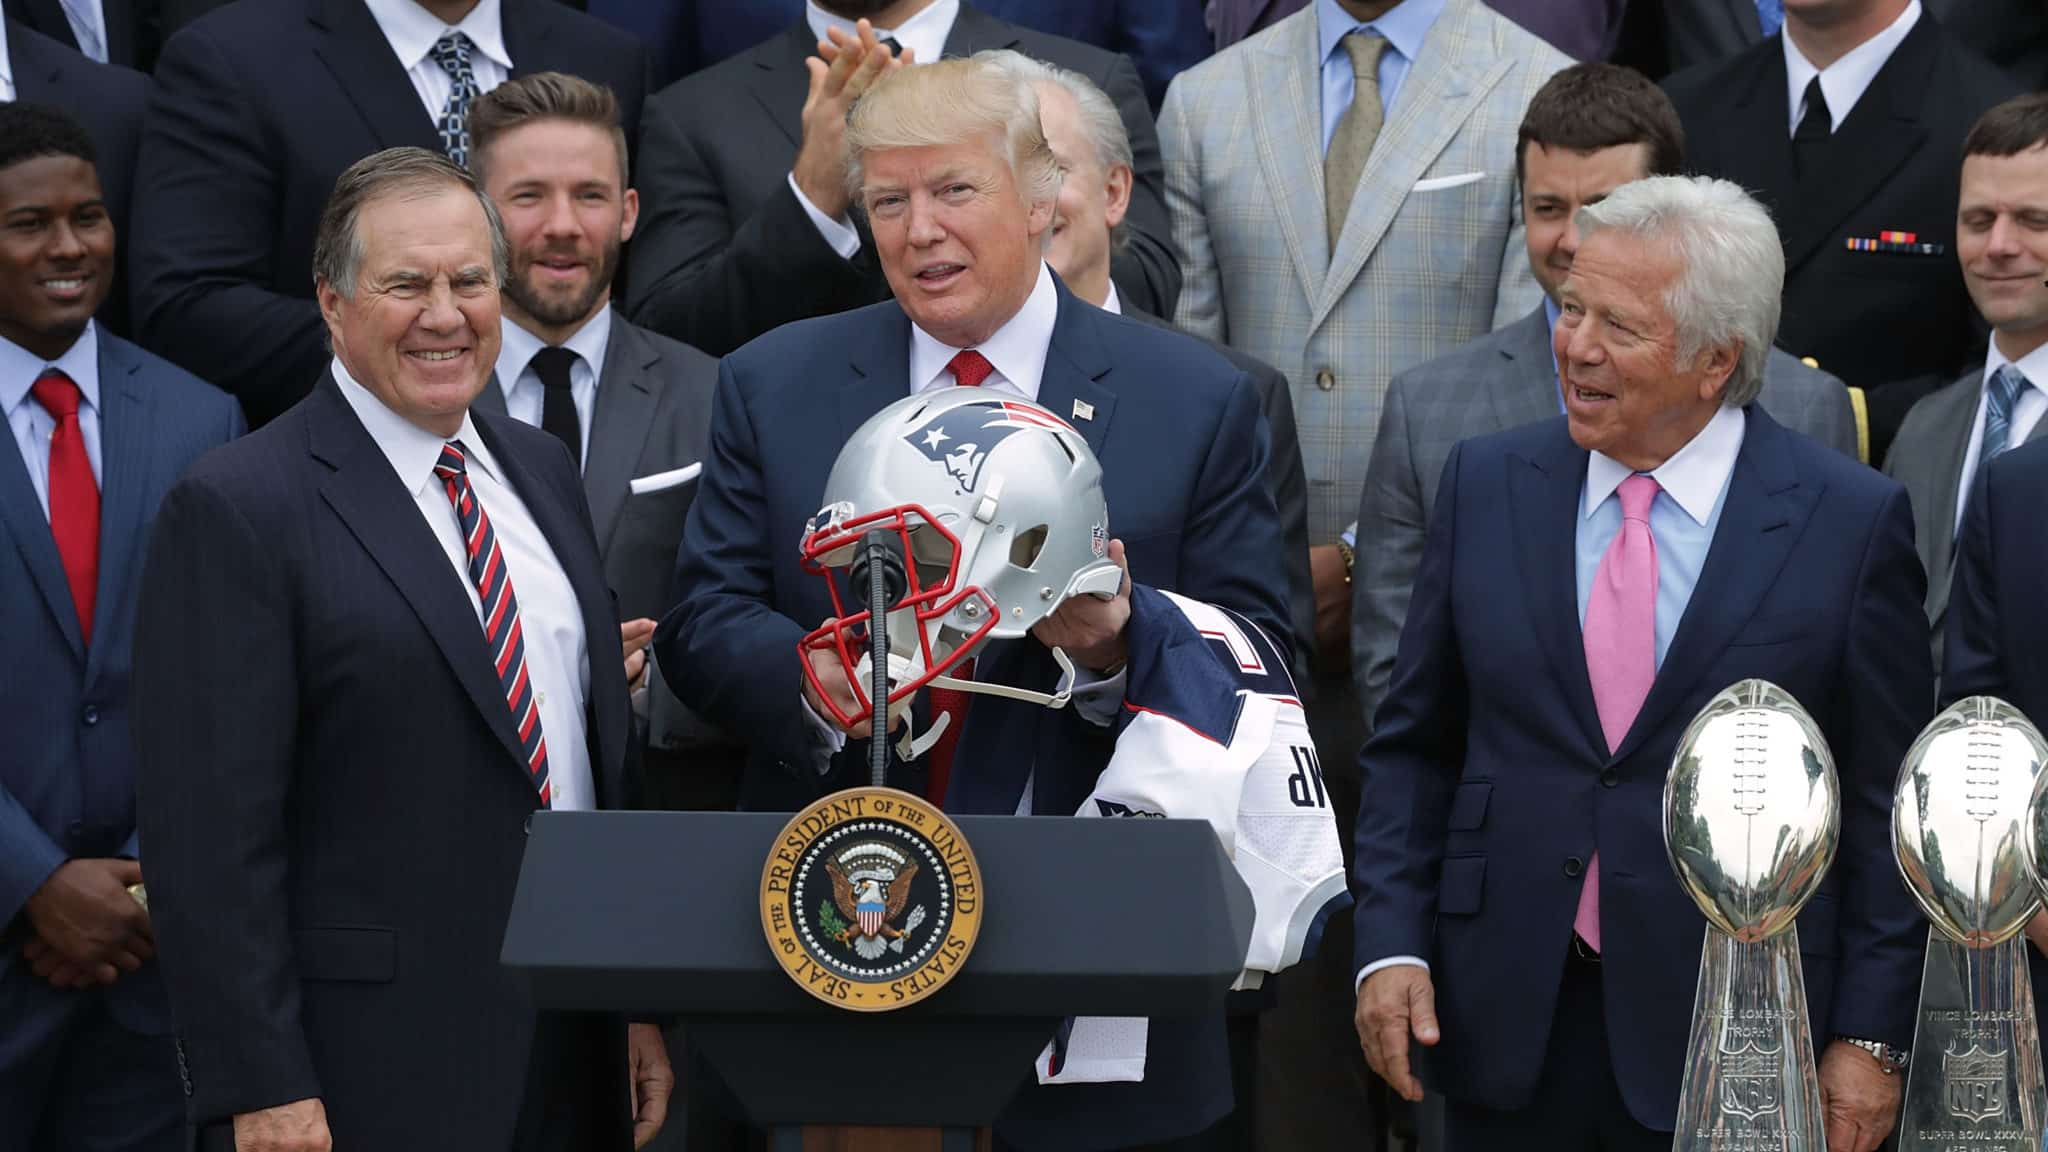 WASHINGTON, DC - APRIL 19: New England Patriots Head Coach Bill Belichick (L) and team owner Robert Kraft (R) present a football helmet to U.S. President Donald Trump during a celebration of the team's Super Bowl victory on the South Lawn at the White House April 19, 2017 in Washington, DC. It was the team's fifth Super Bowl victory since 1960.